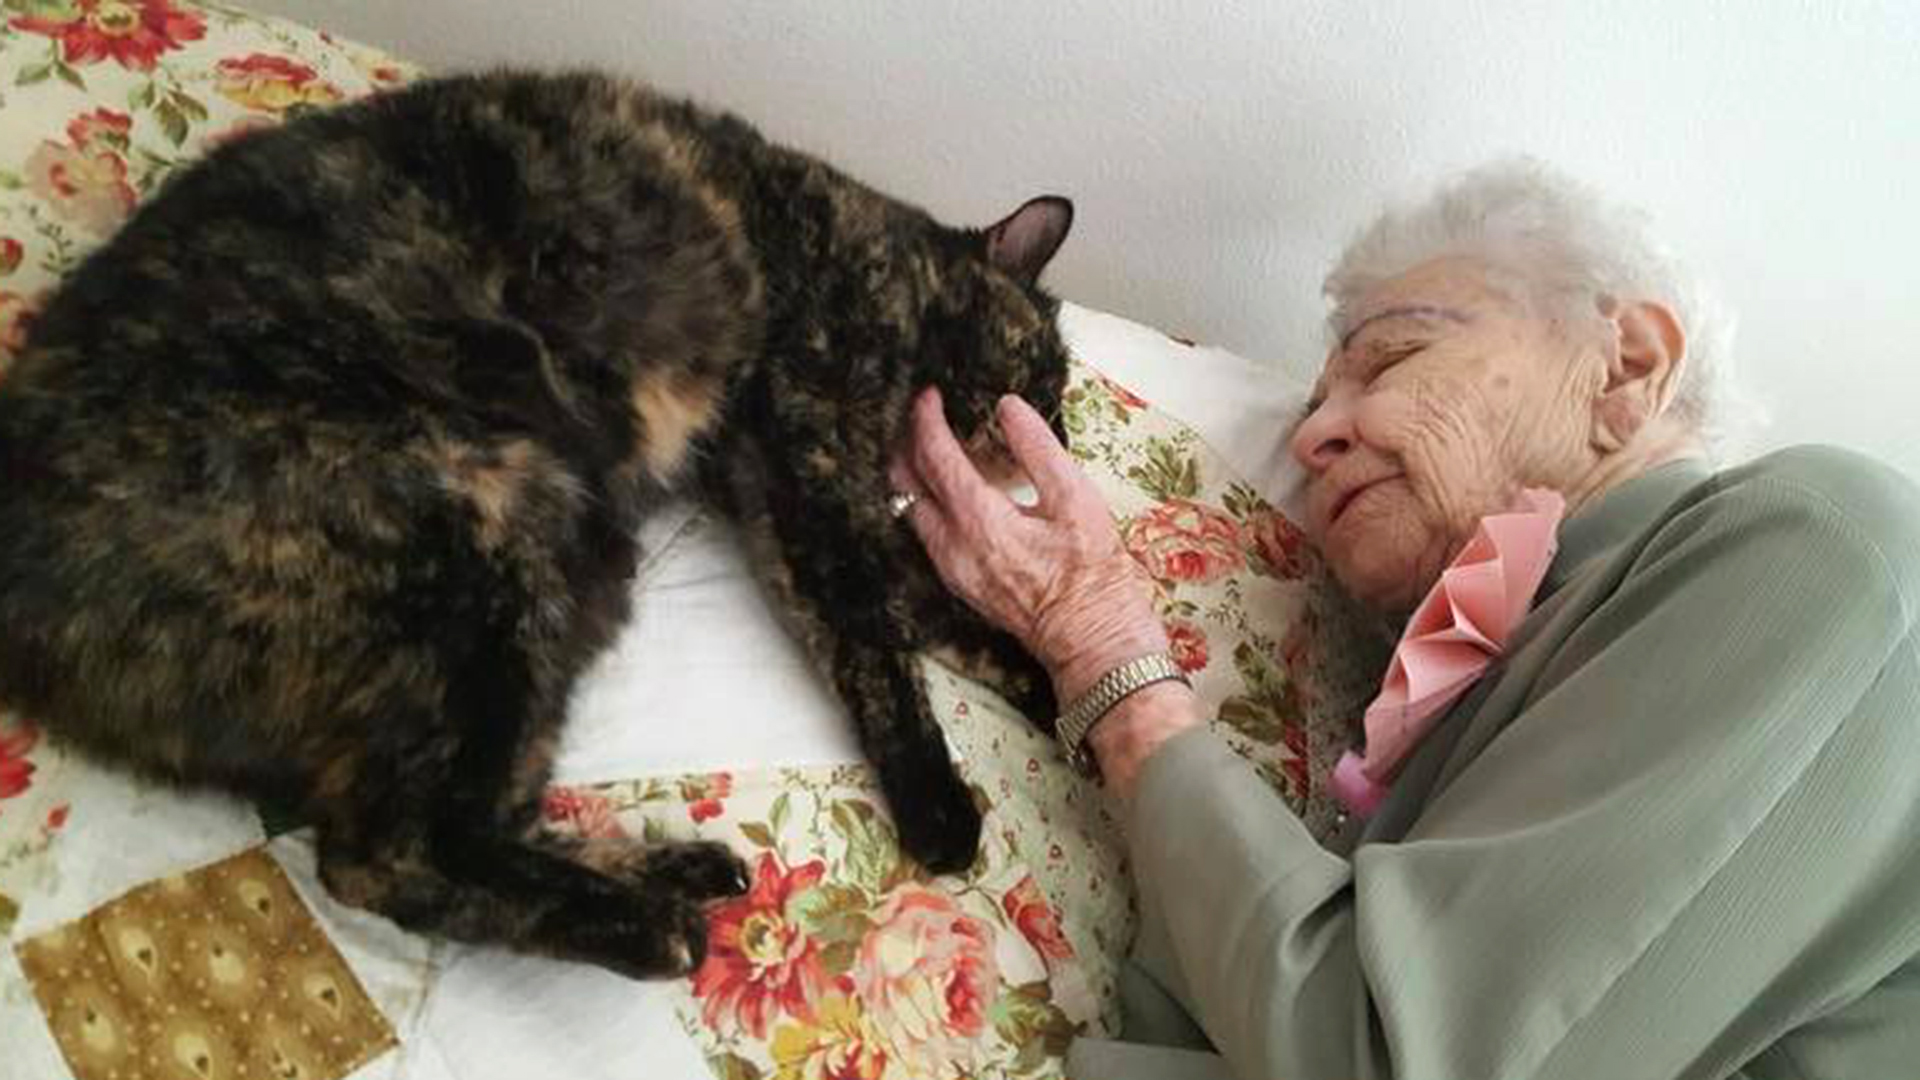 103-year-old gets birthday surprise: a cat in need of a home